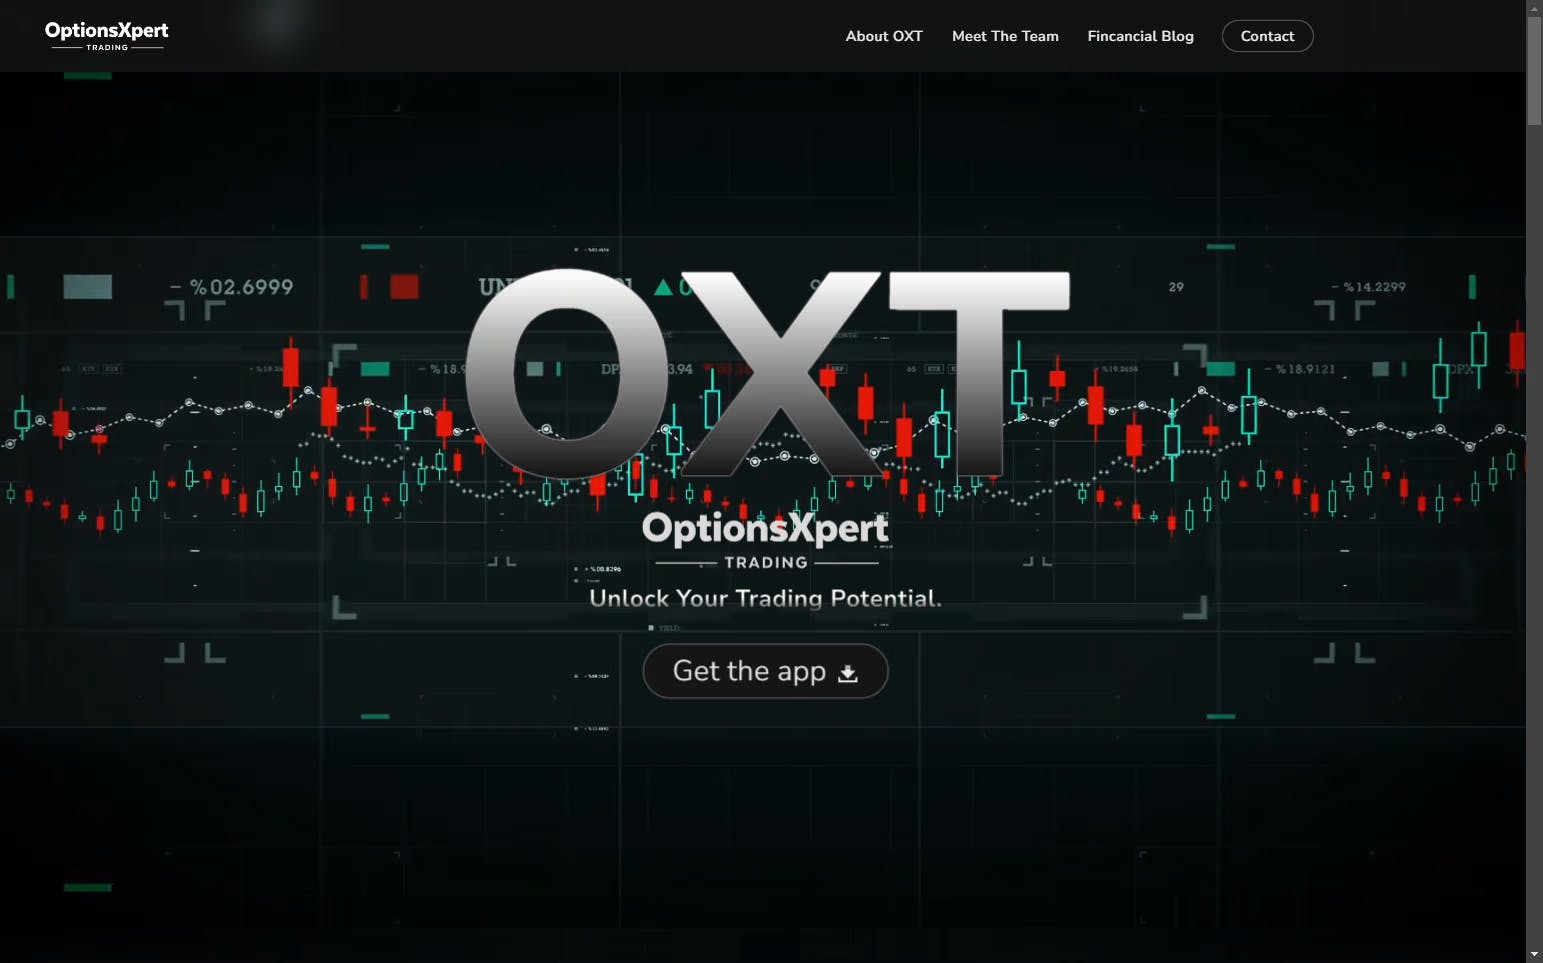 Options Xpert Trading